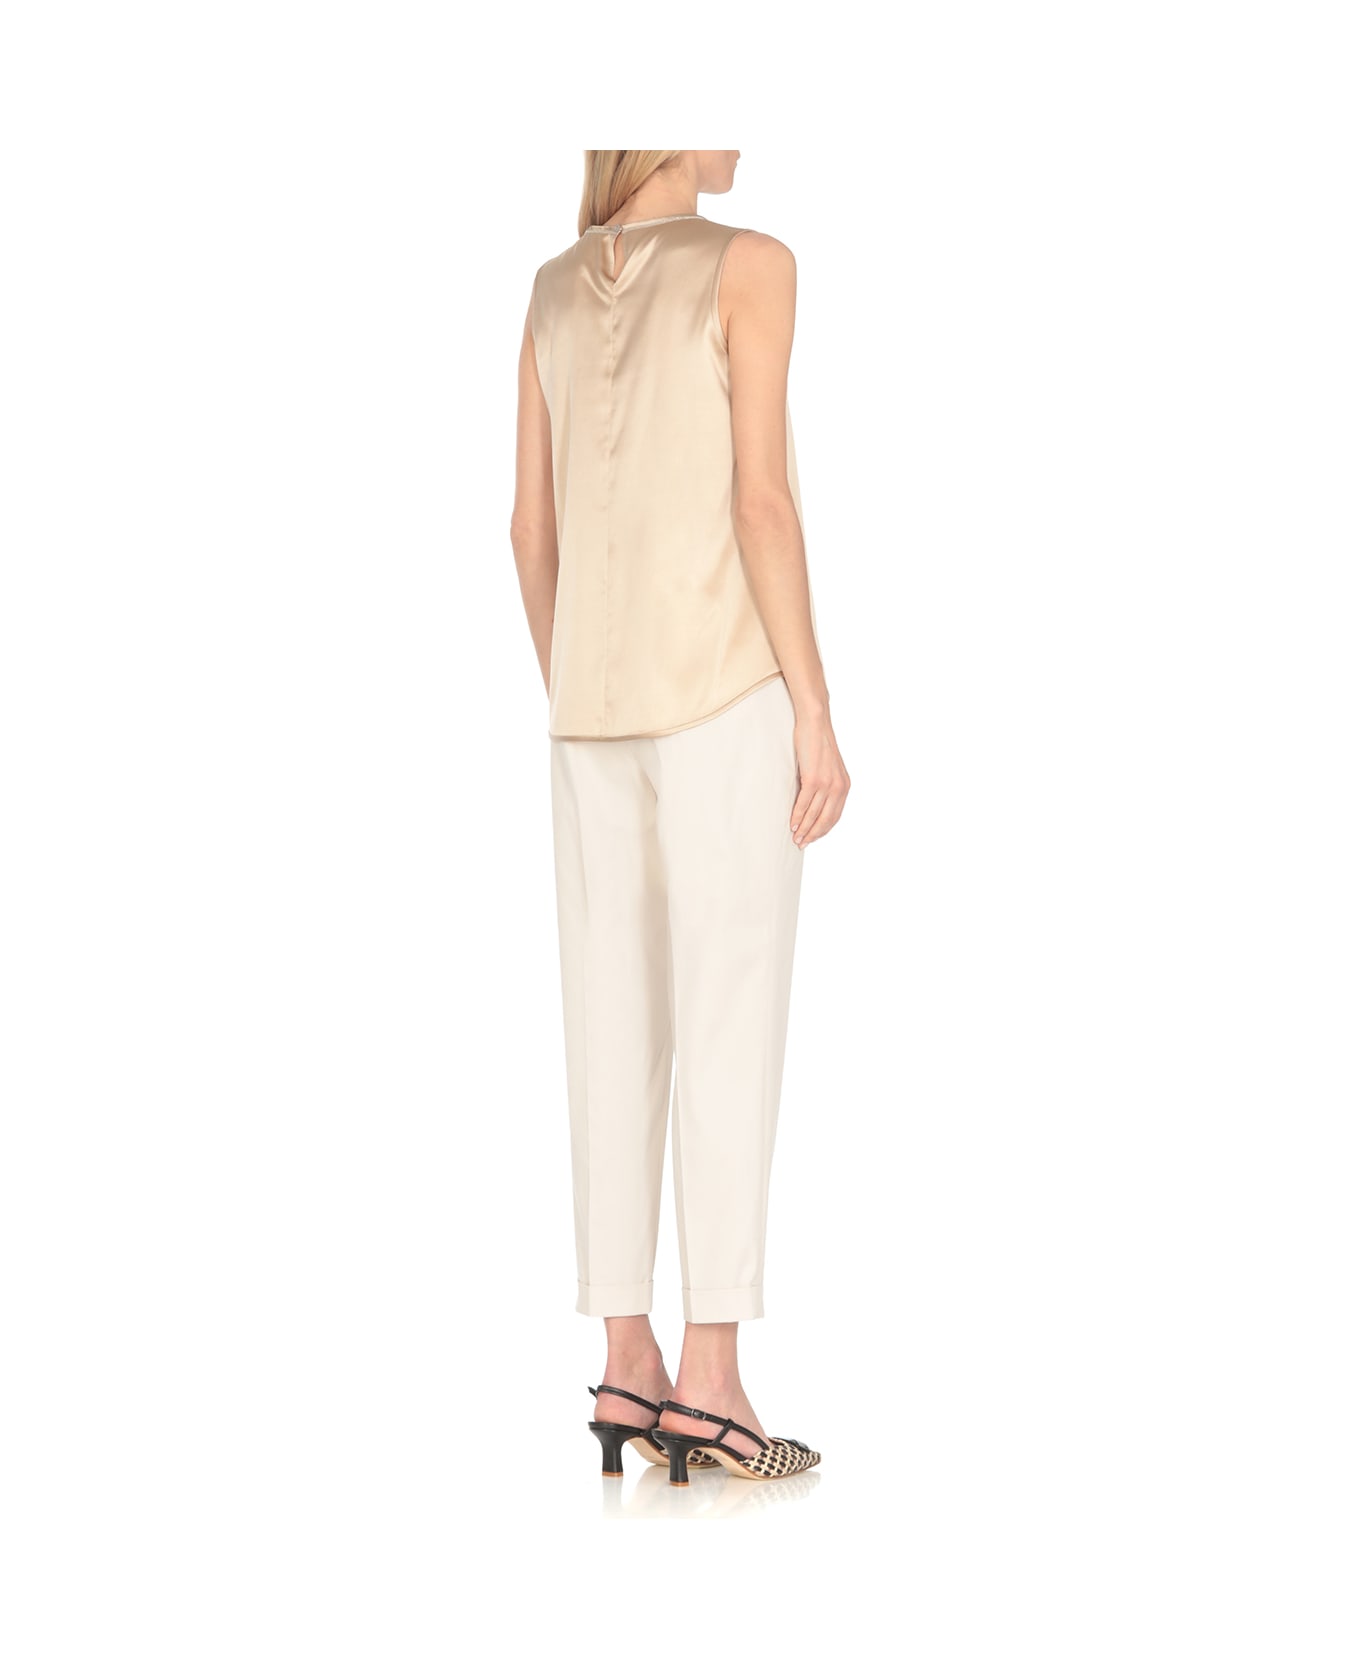 Peserico Top With Light Point Details - Beige